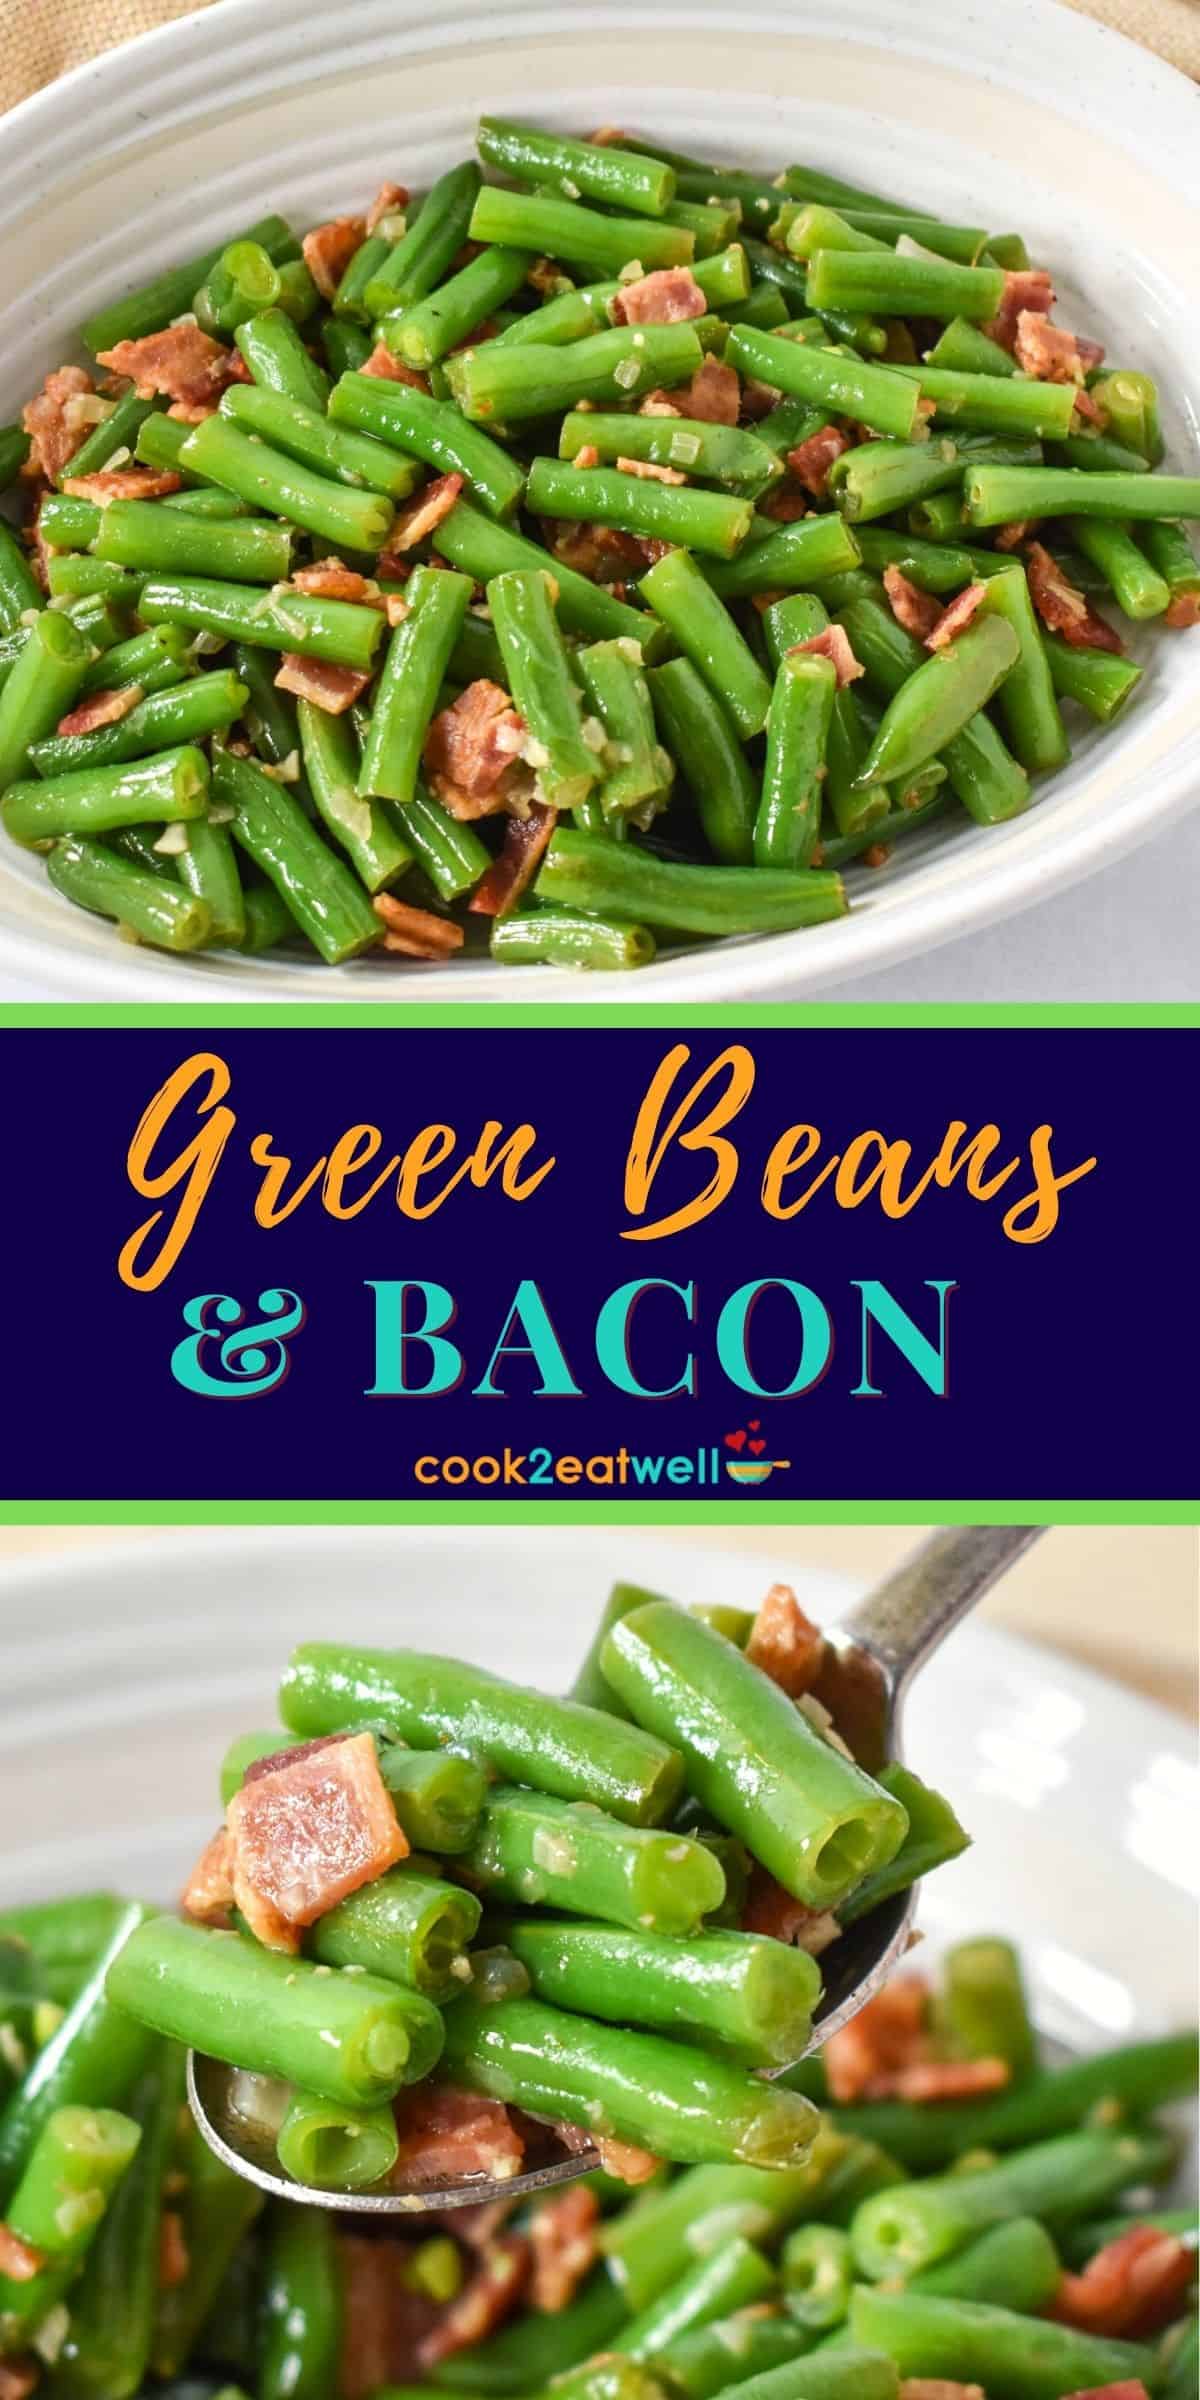 Green Beans with Bacon - Cook2eatwell